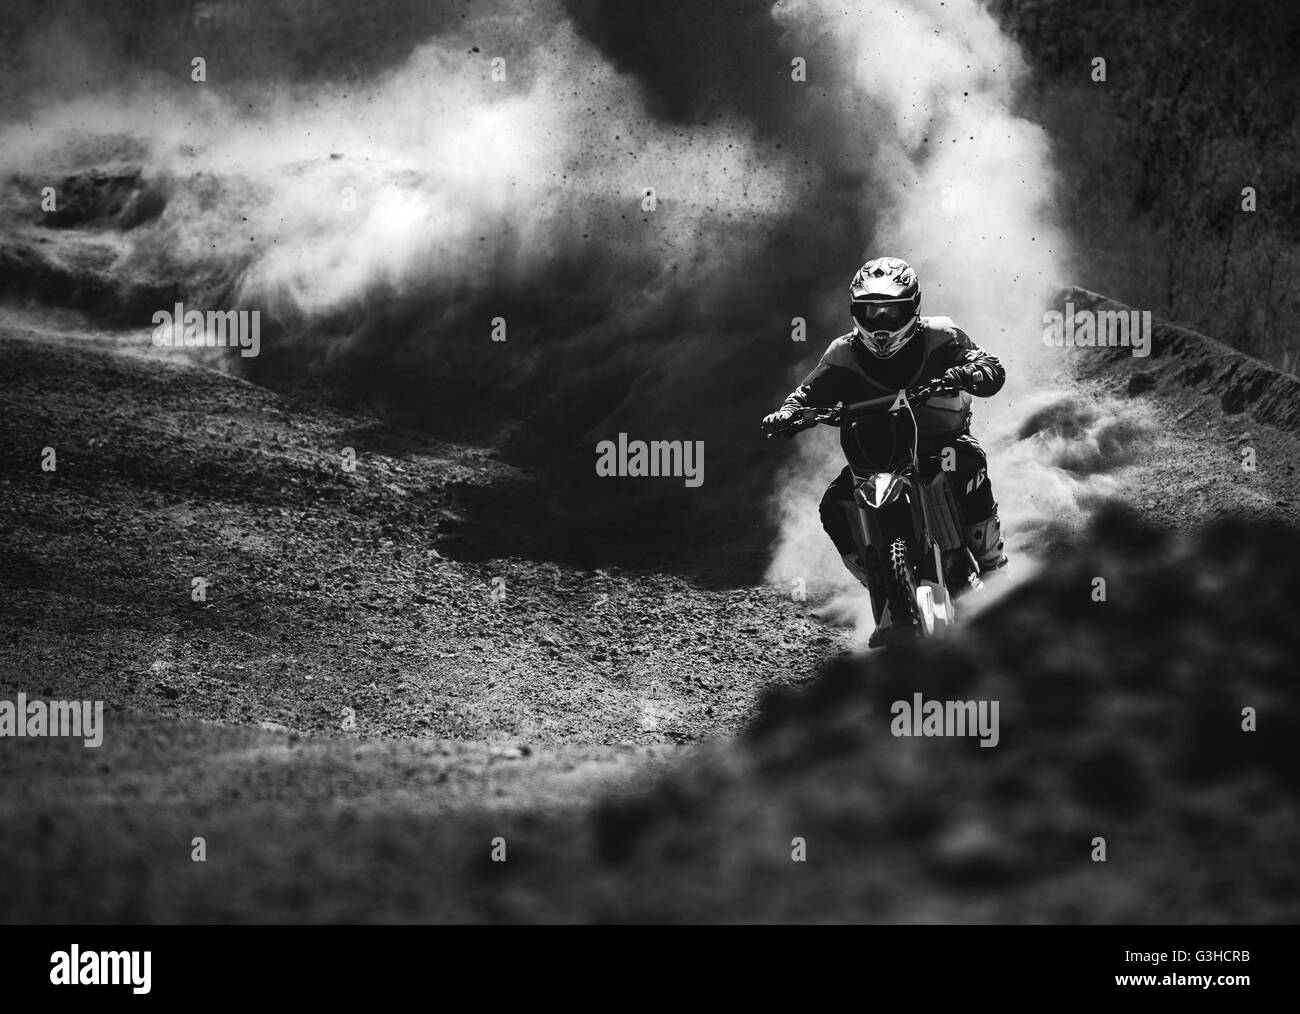 Motocross racer accelerating in dust track, Black and white photo Stock Photo